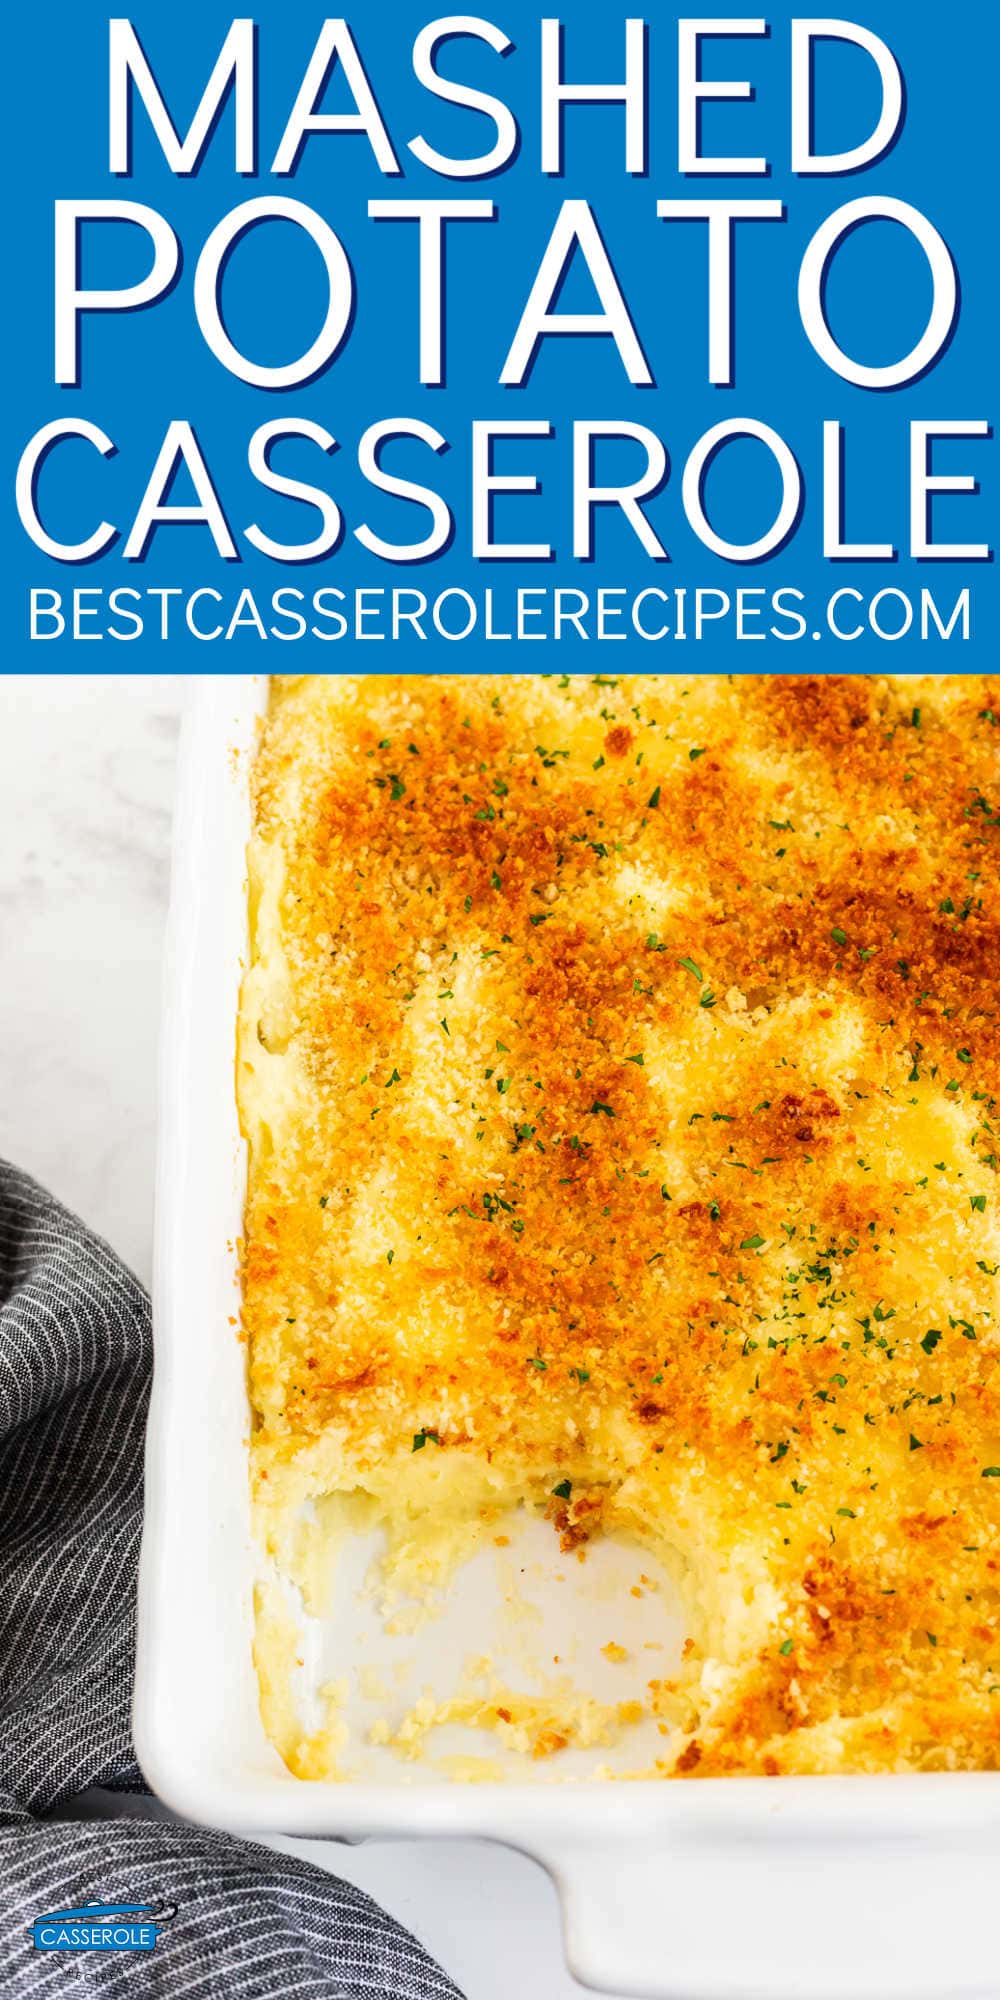 scoop missing from casserole with blue banner and text "mashed potato casserole"